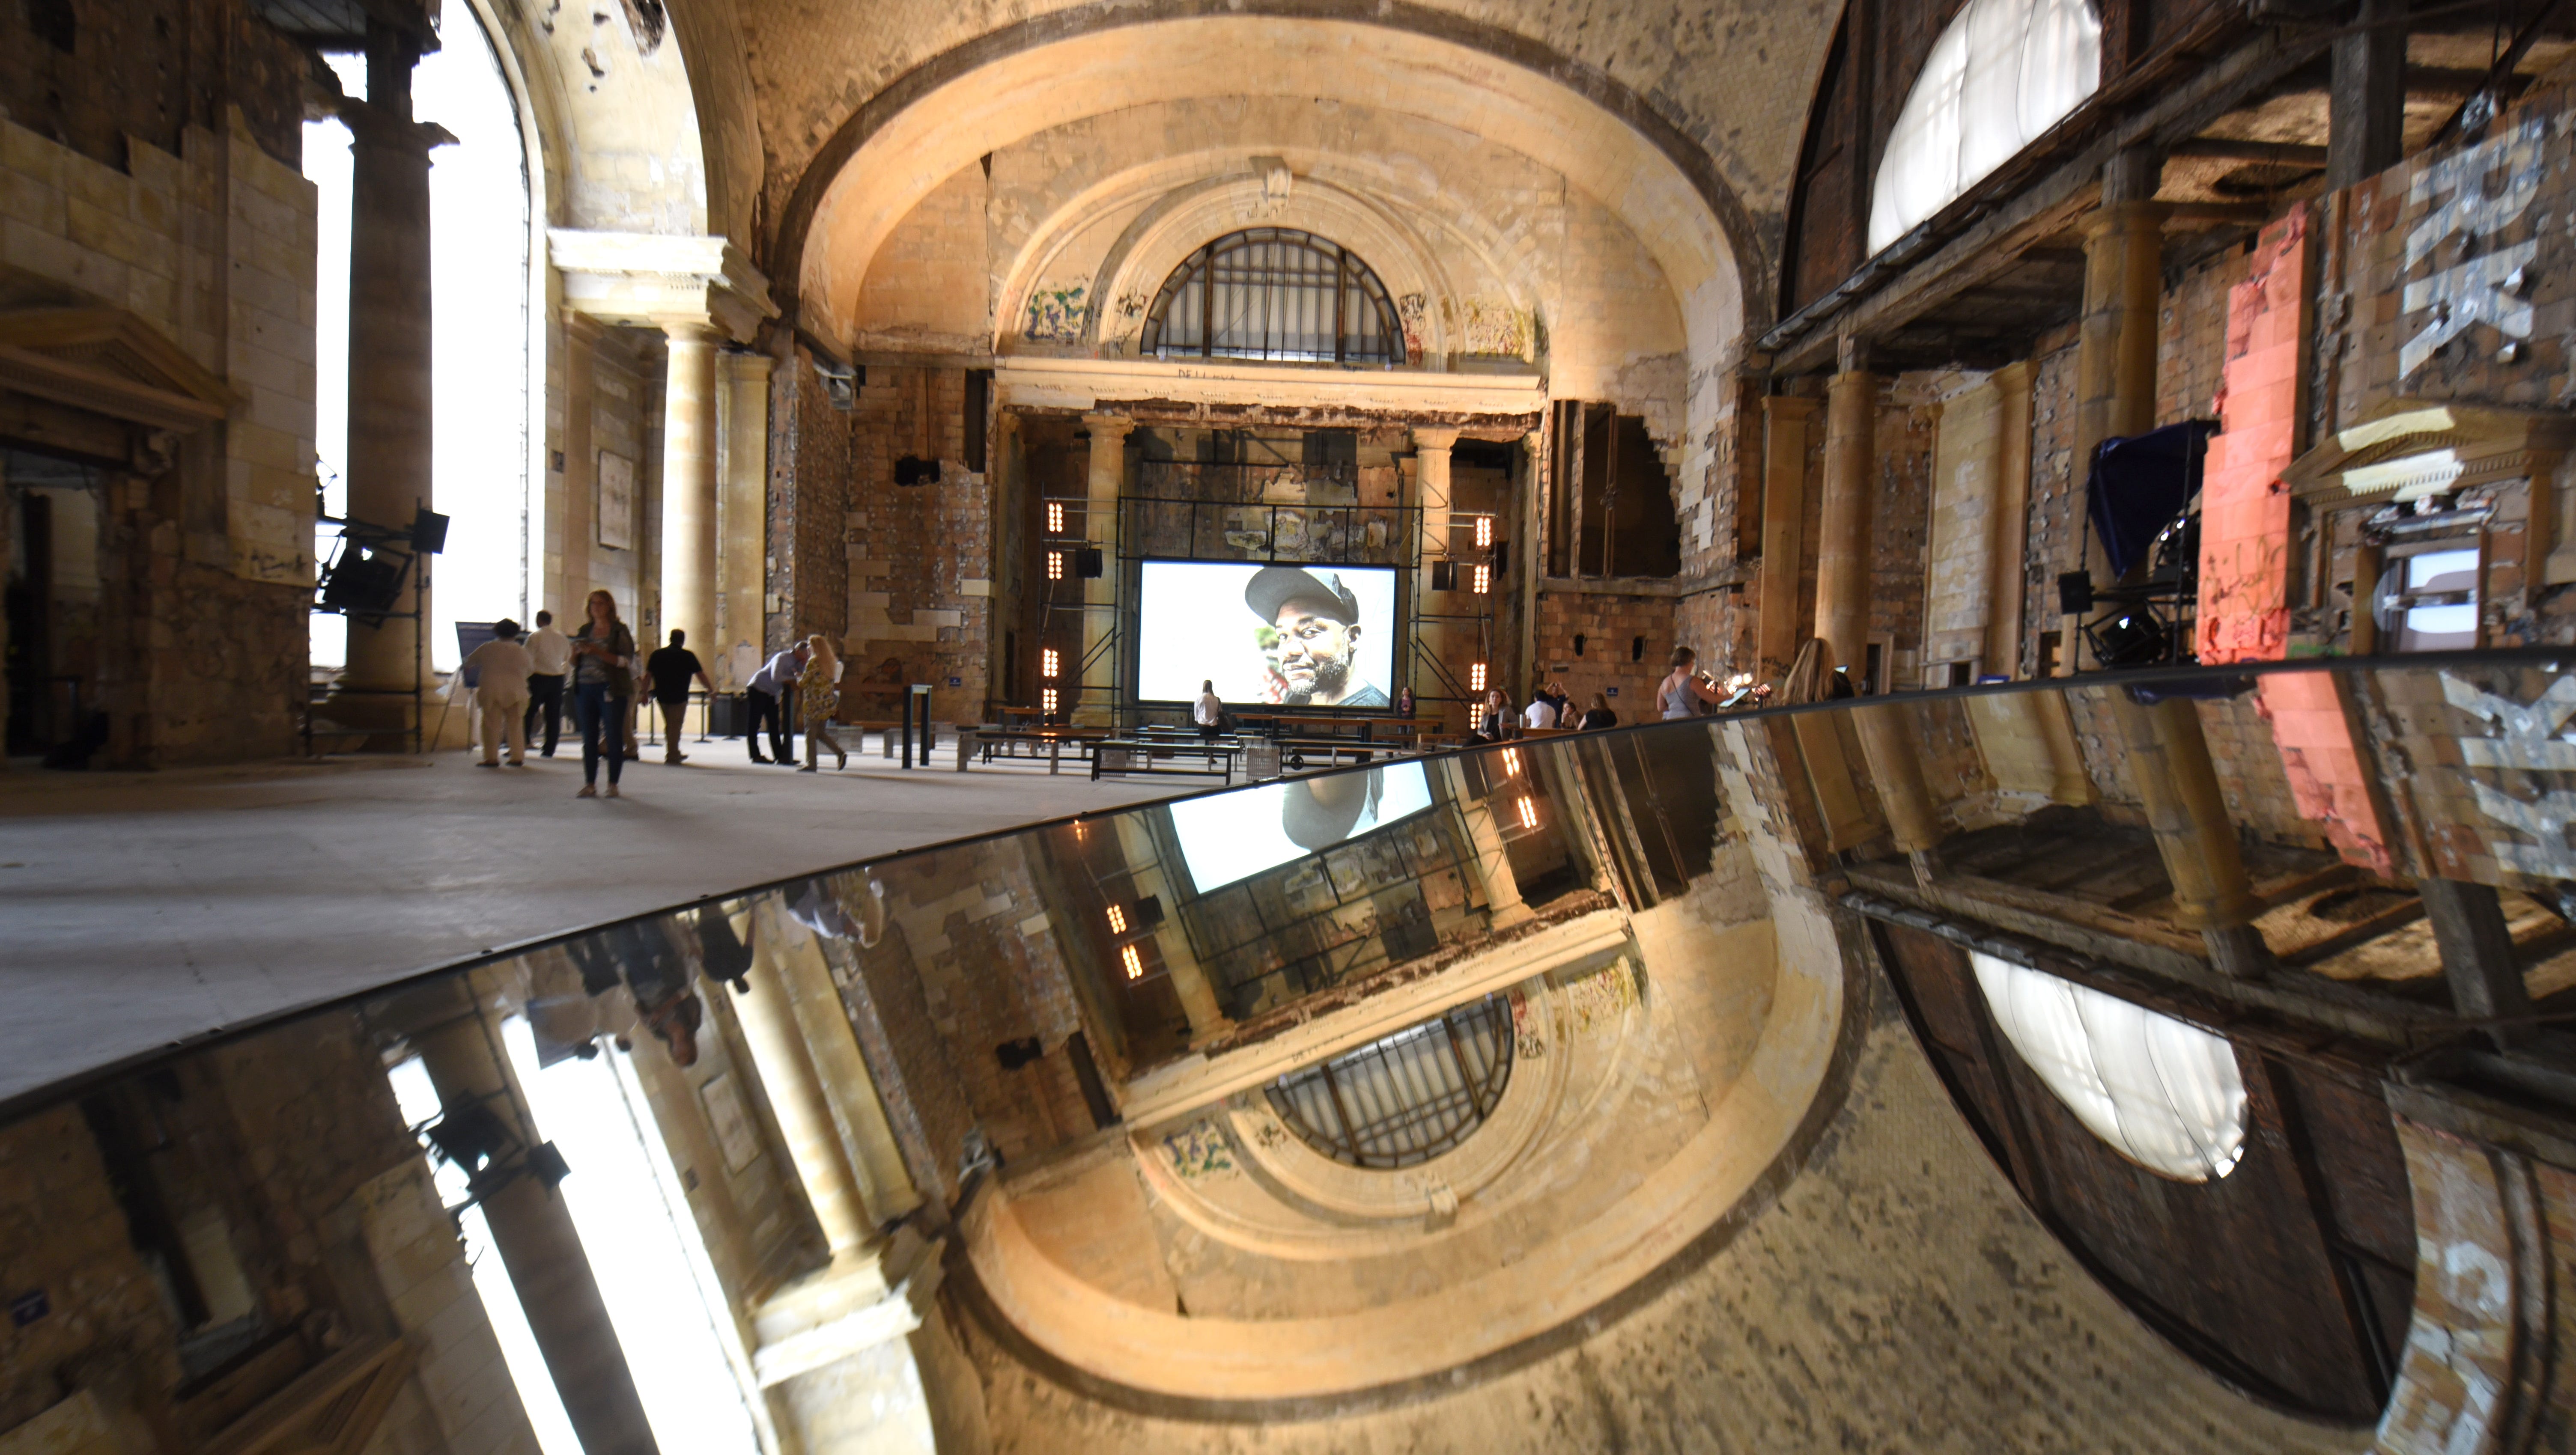 A mirror reflects the ceiling in the grand hall of the Michigan Central Train Depot on Friday. The Ford Motor Company hosted tours.